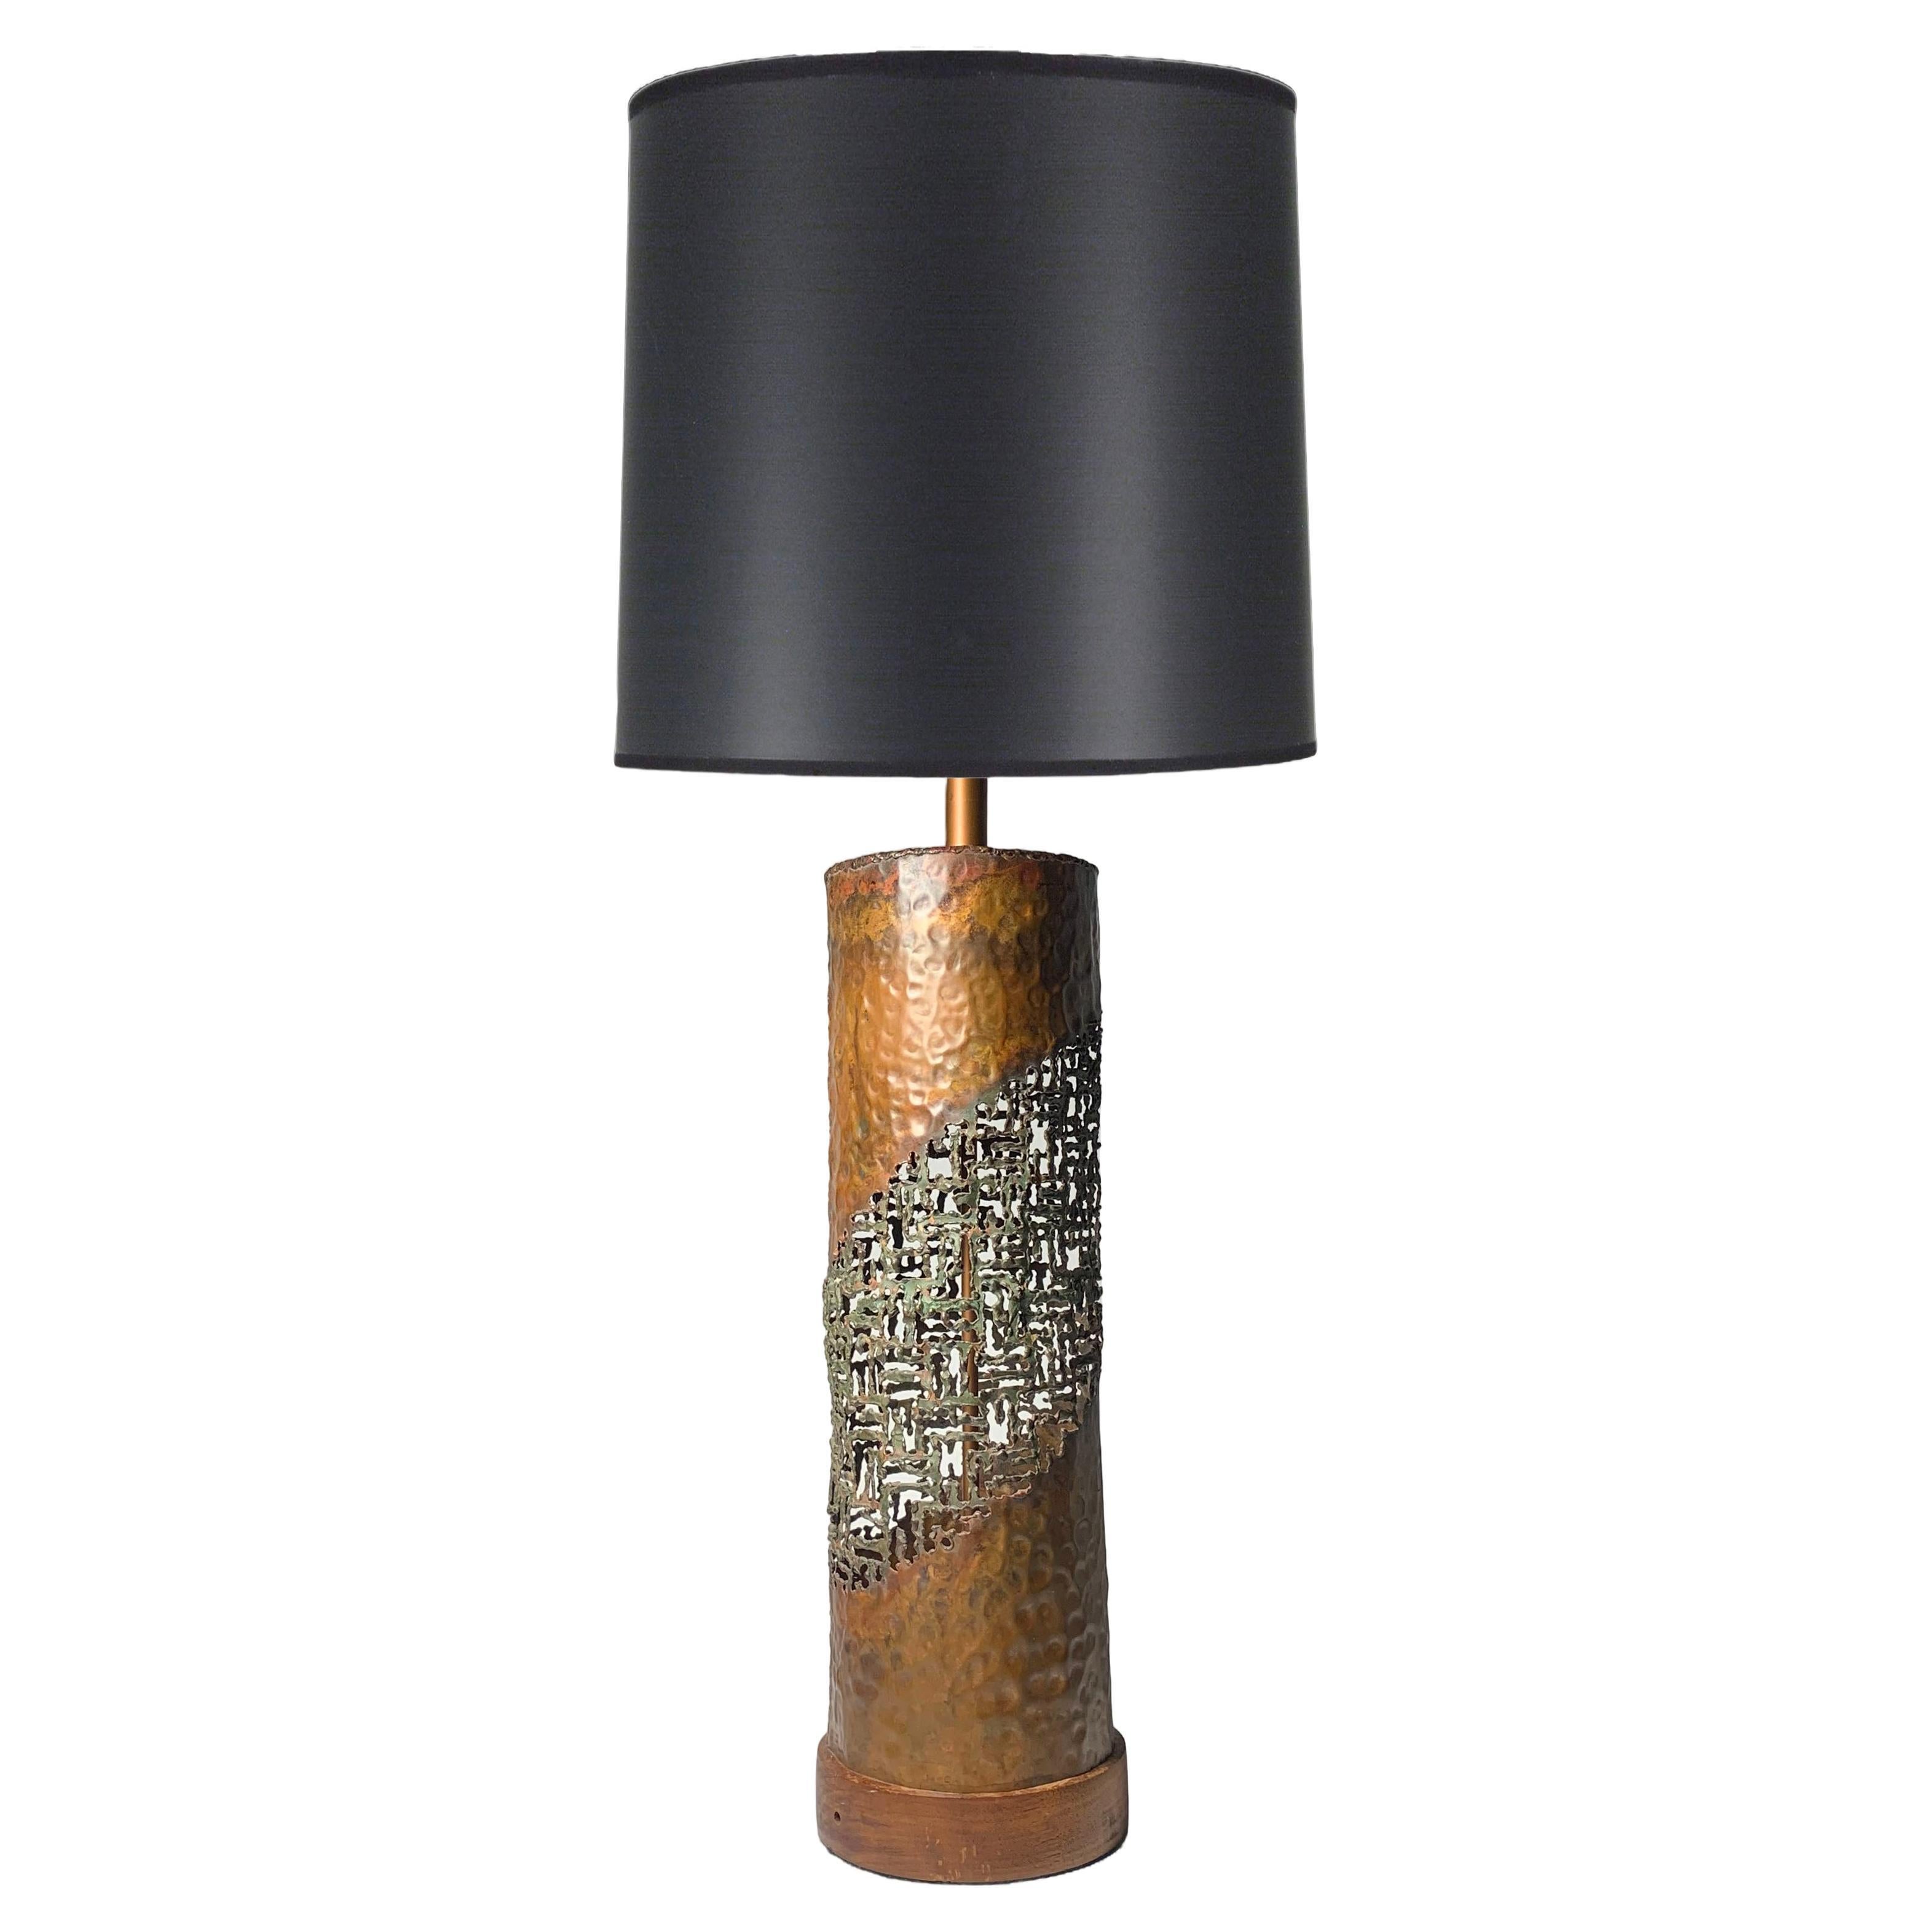 Marcello Fantoni for Raymor Copper Torch-Cut Table Lamp For Sale